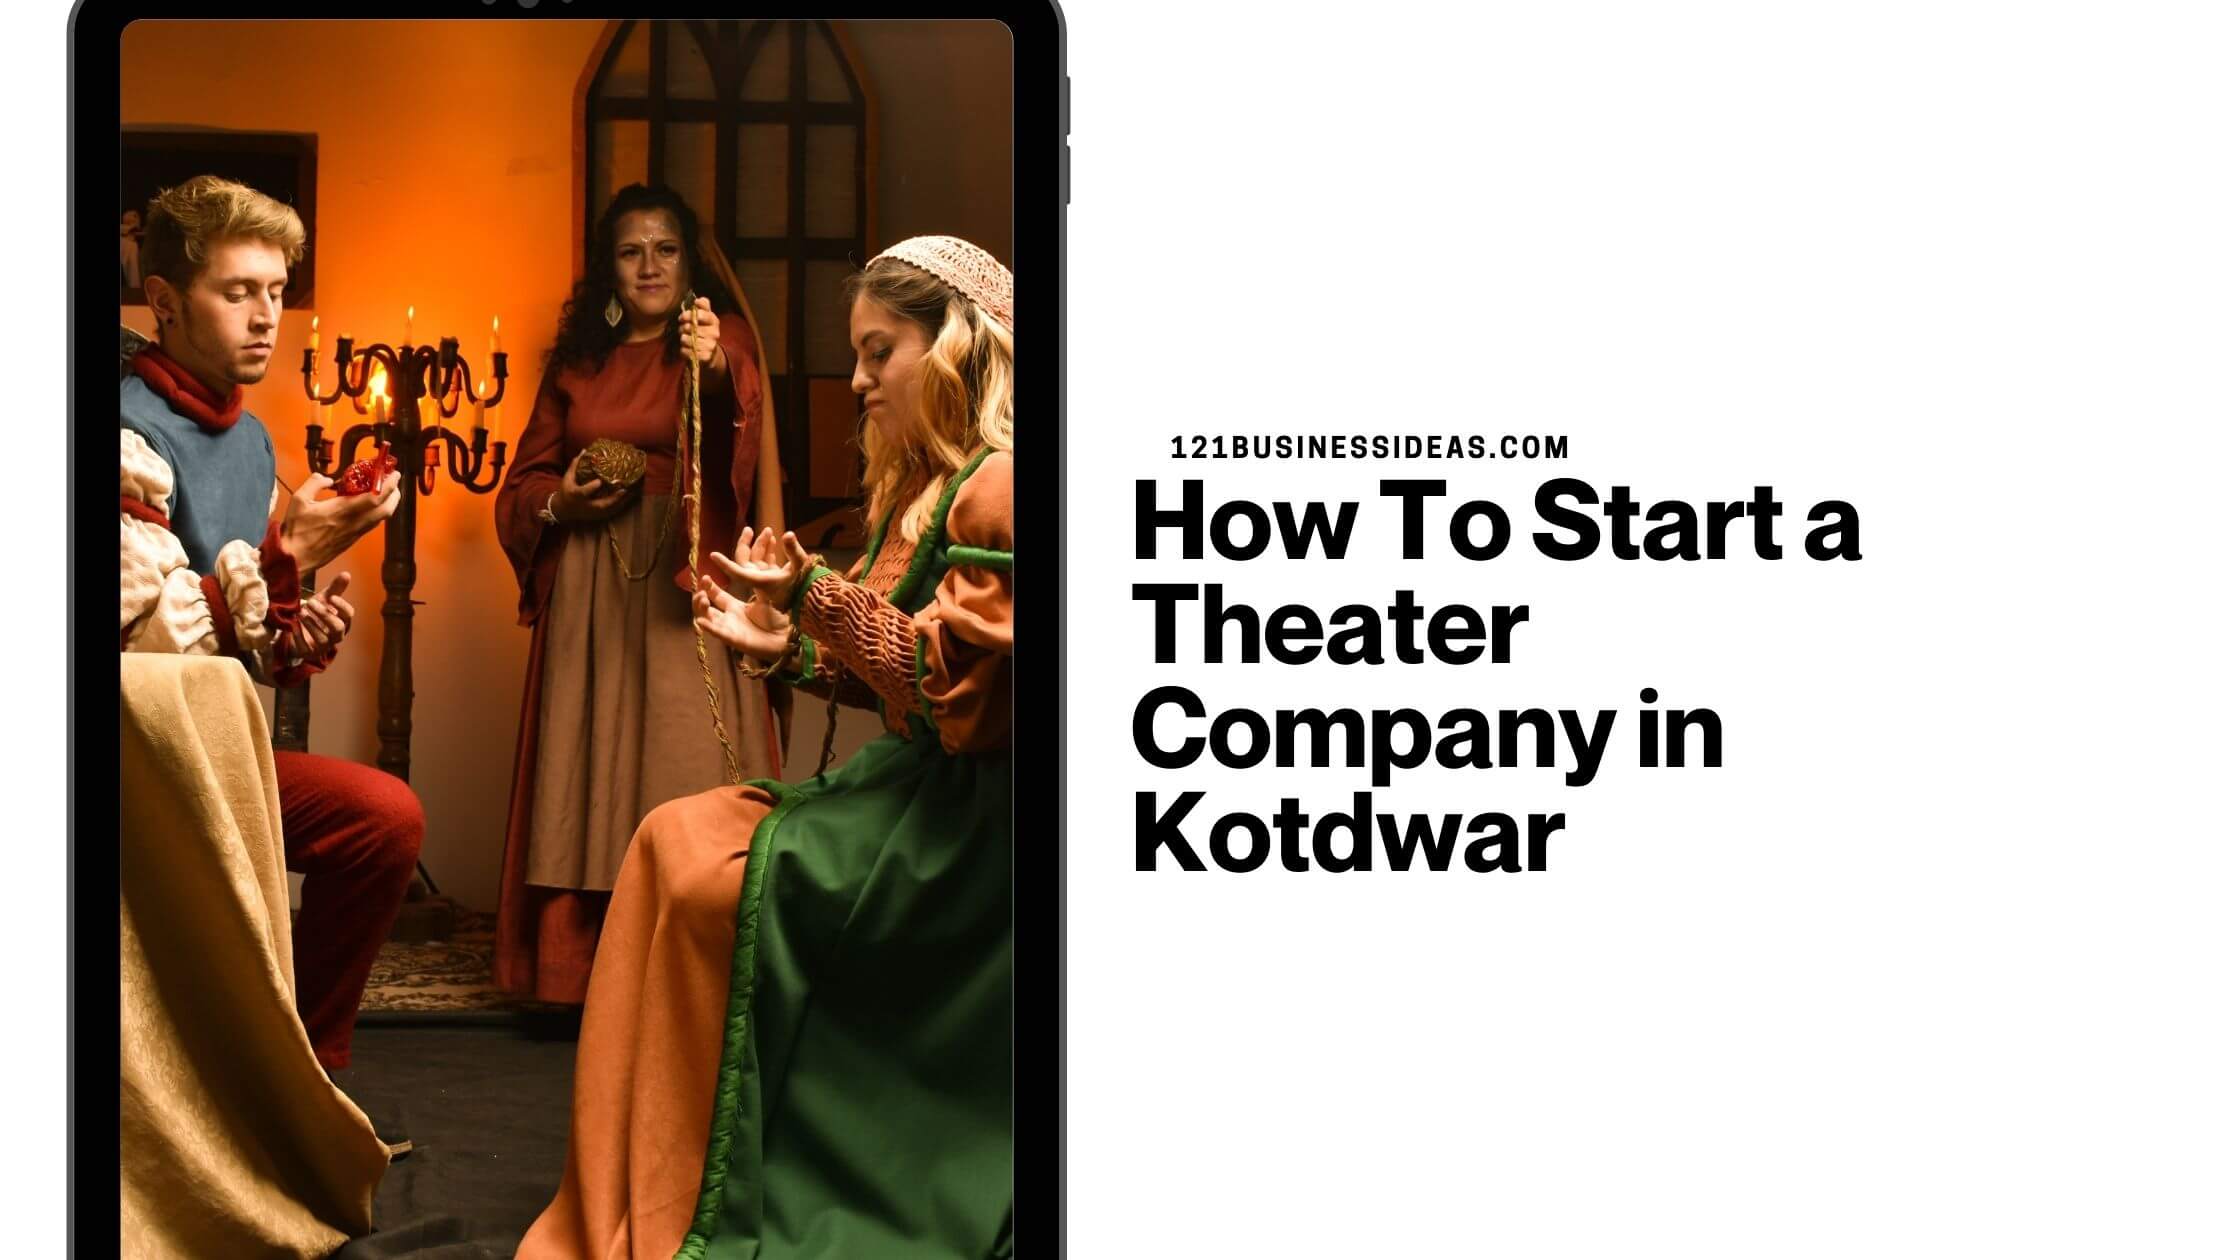 How To Start a Theater Company in Kotdwar (1)